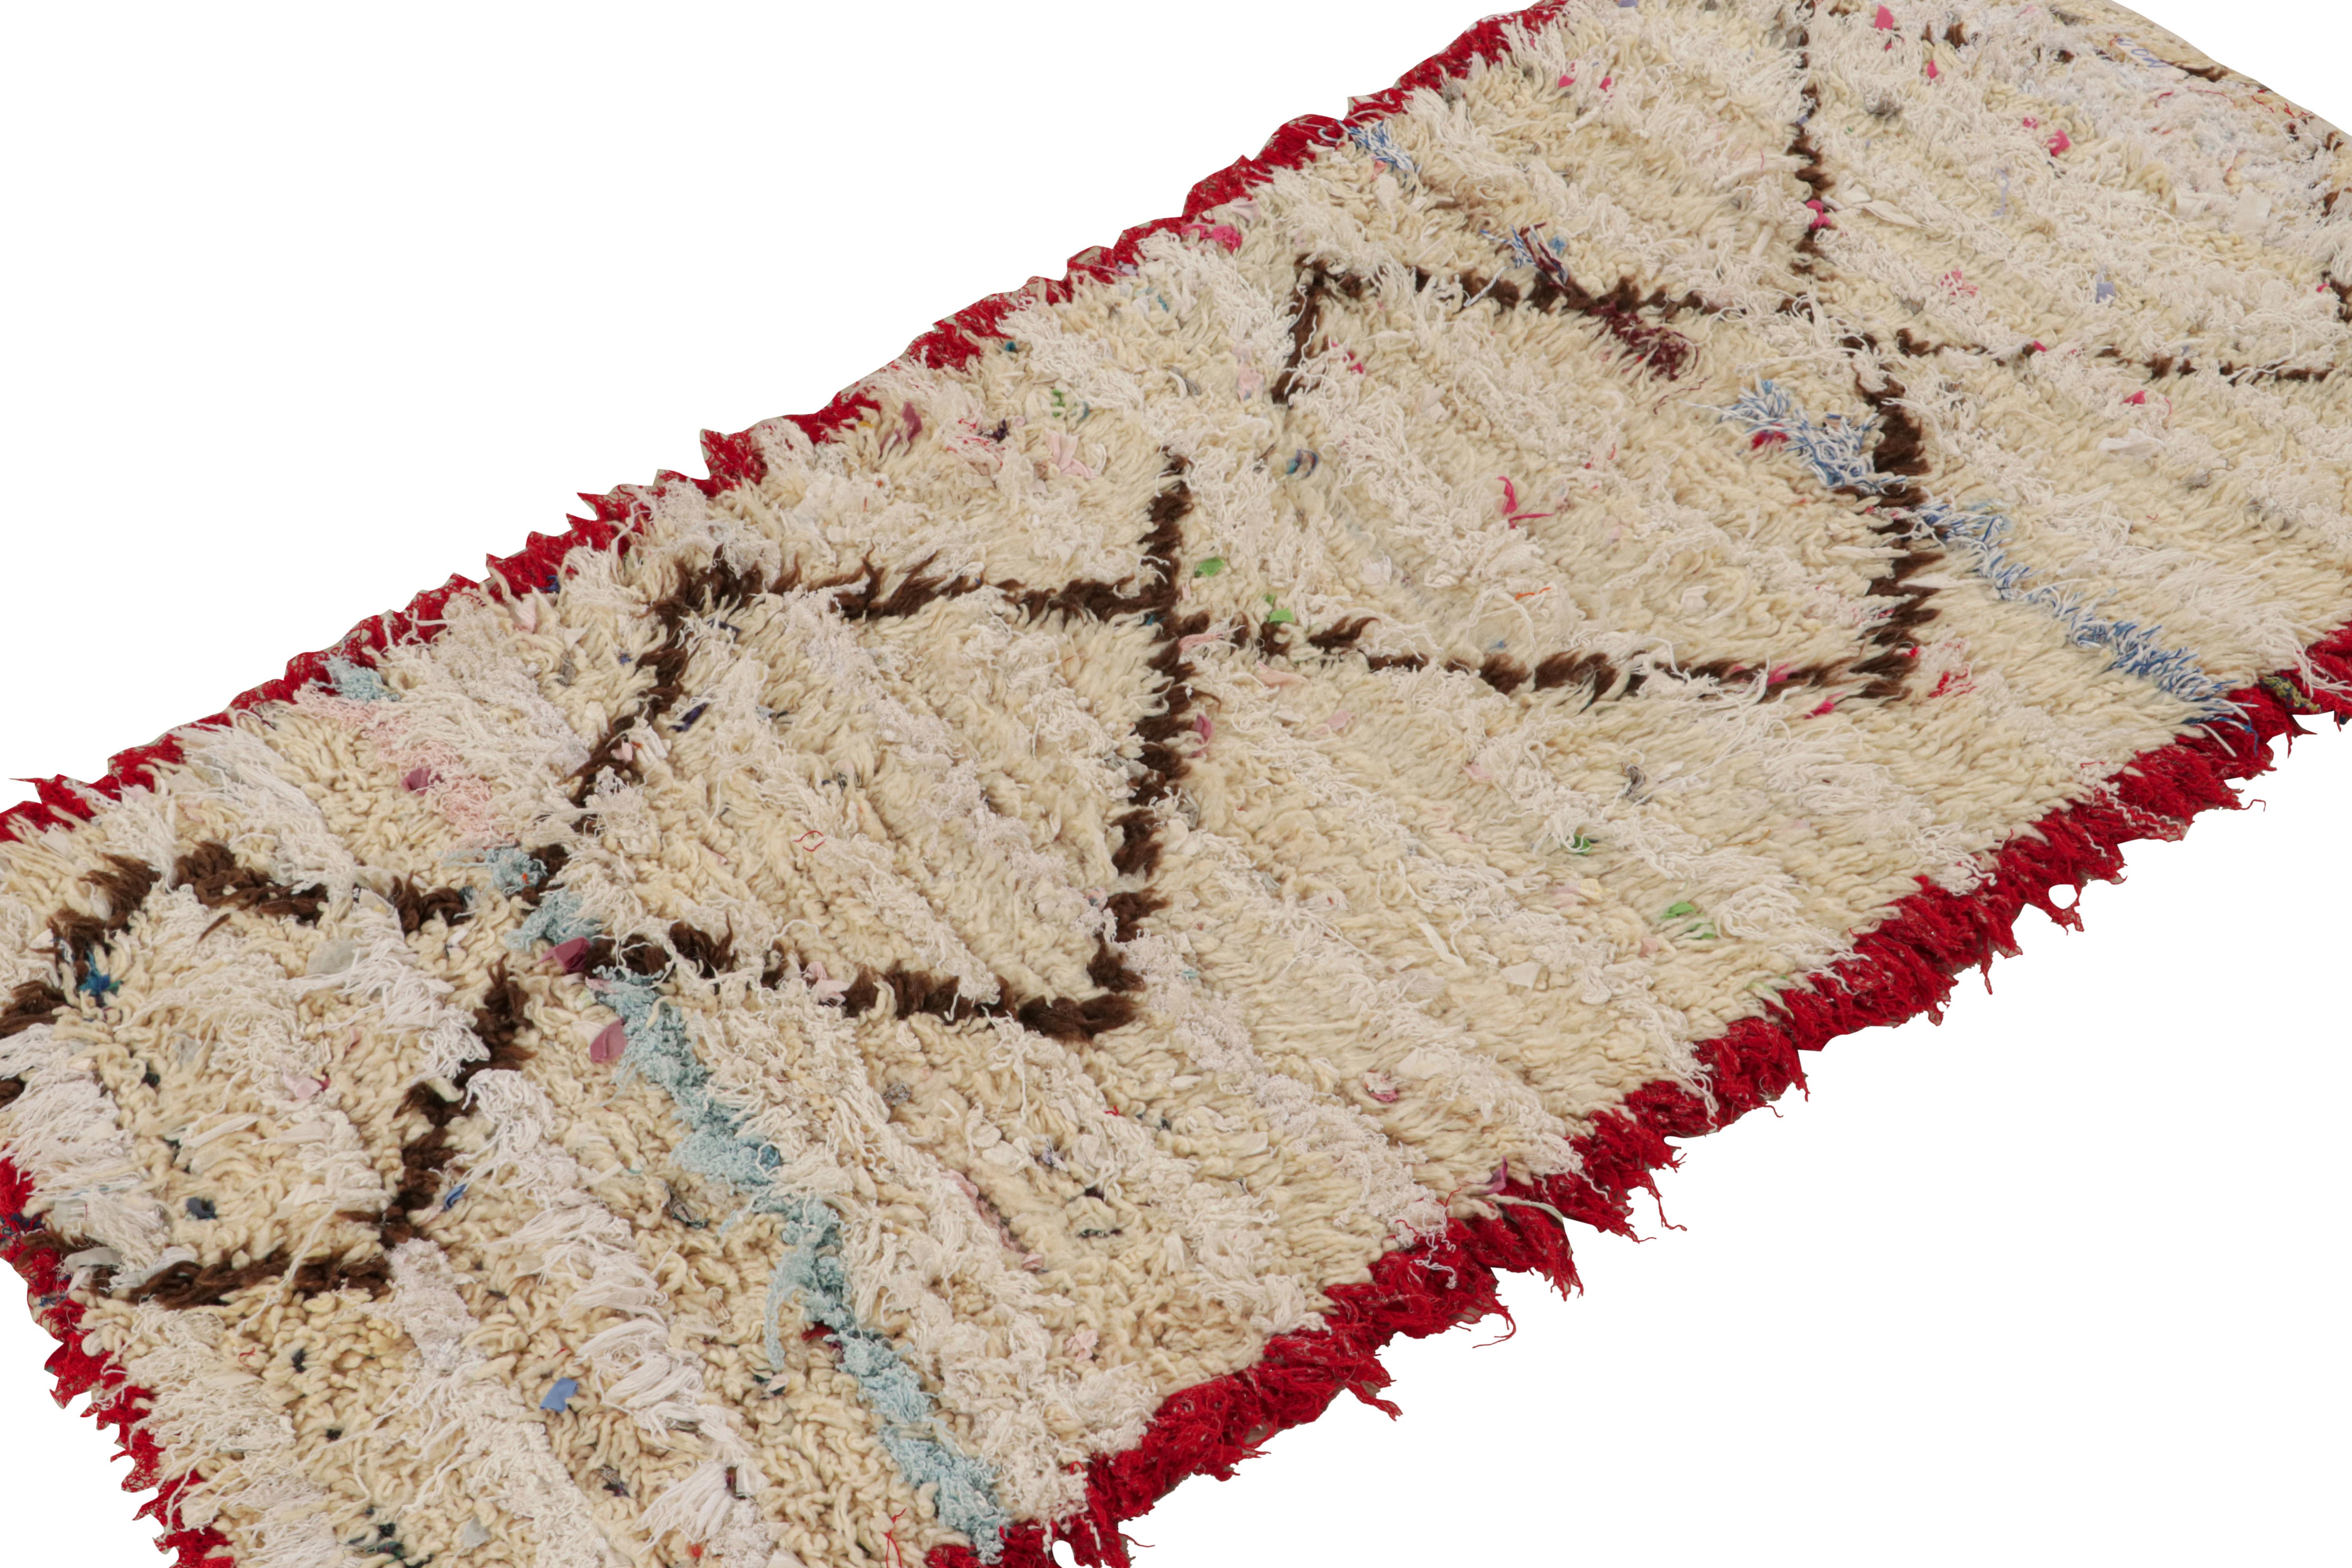 Hand-knotted in wool and cotton circa 1950-1960, this vintage 3x5 Moroccan rug is believed to hail from the Azilal tribe. 

On the Design: 

This rug enjoys a repetition of brown diamond patterns on a beige background. This simple design gets an